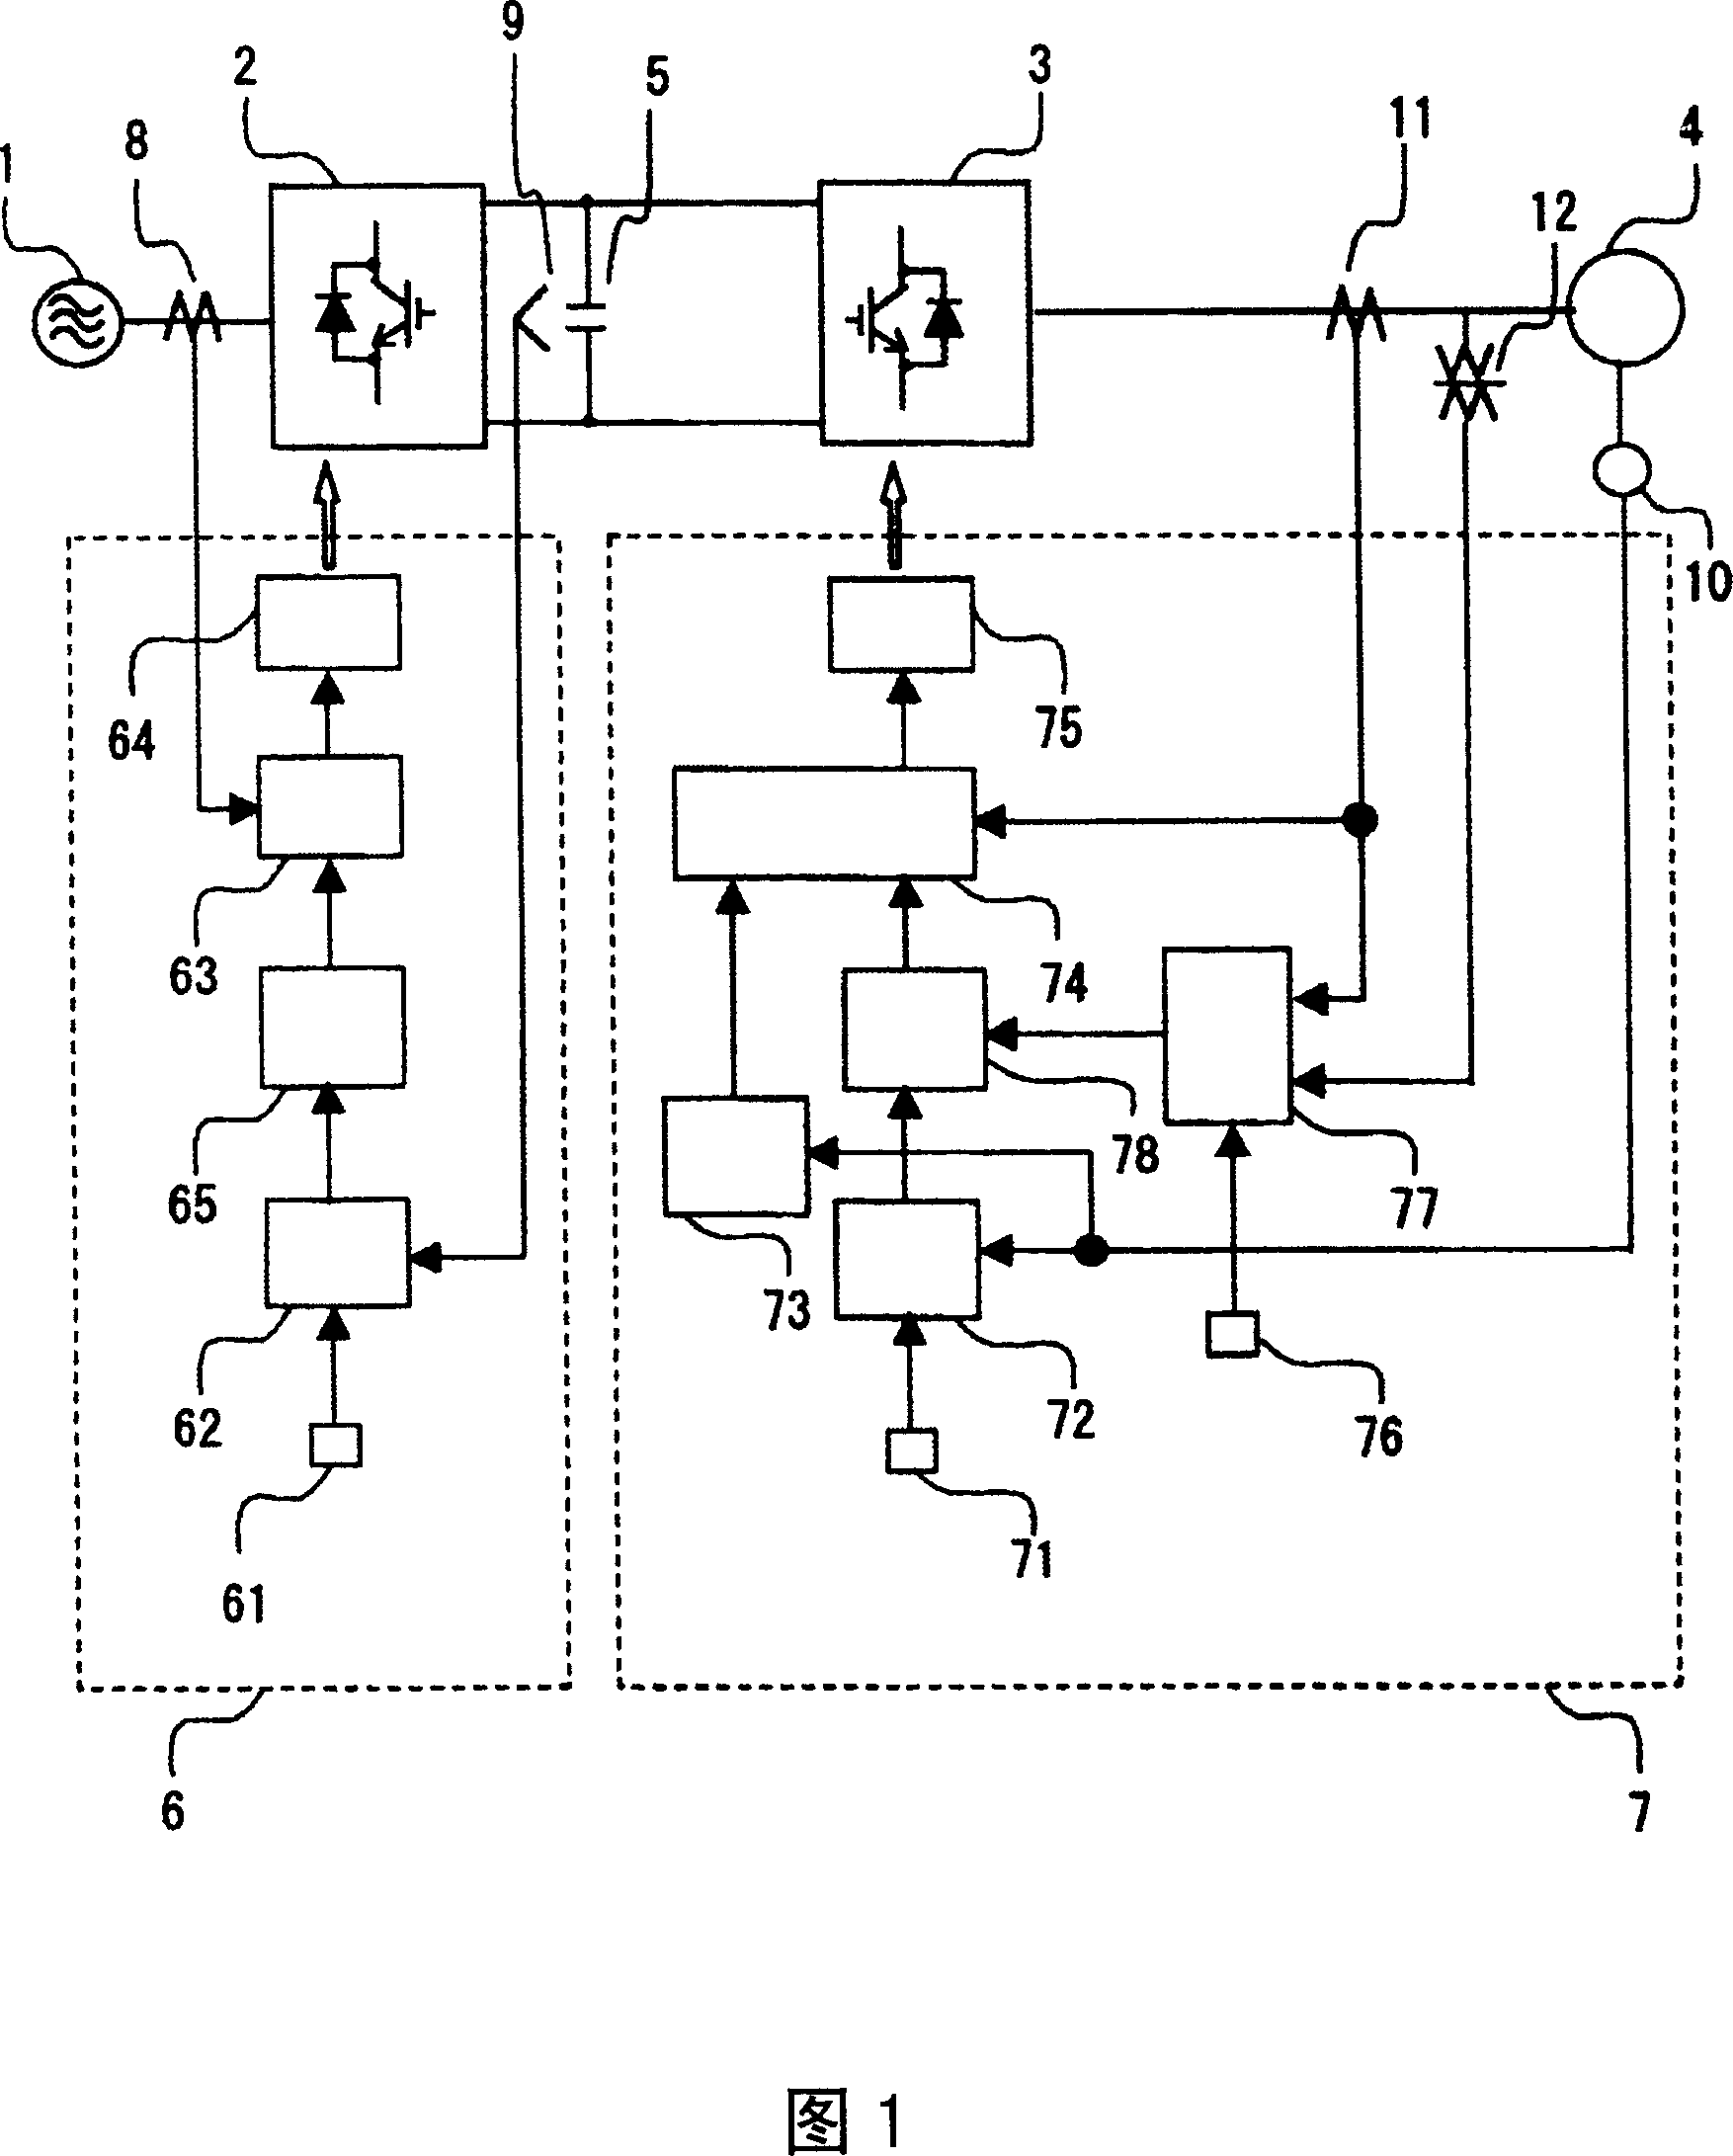 Ac motor system and method for controlling same, and related power conversion device